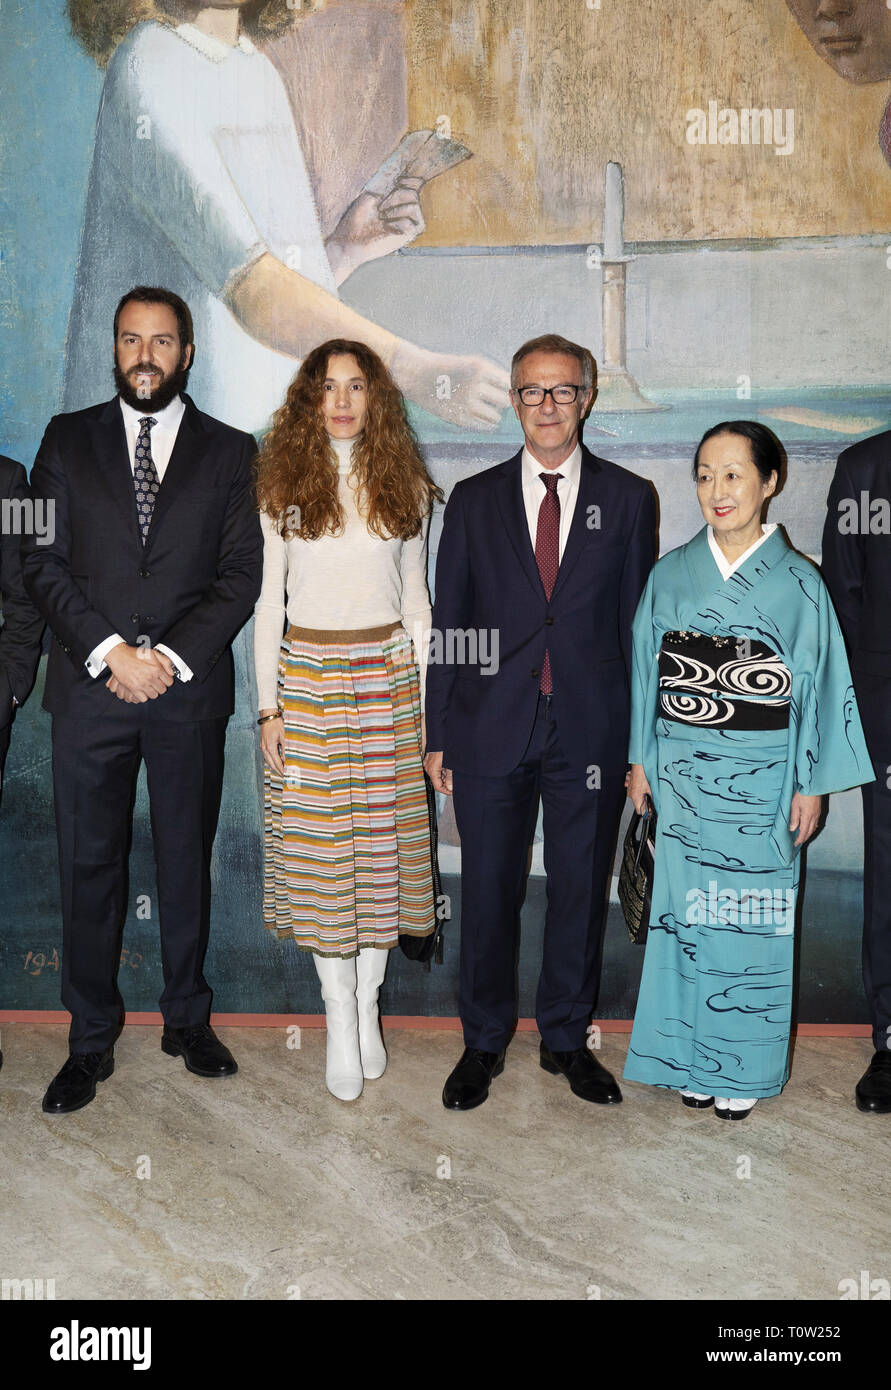 The opening of the Balthus exhibition by French artist Balthasar Klossowski de Rola at the Thyssen-Bornemisza National Museum in Madrid  Featuring: Setsuko Klossowska de Rola, Borja Thyssen-Bornemisza, Blanca Cuesta Where: Madrid, Spain When: 18 Feb 2019 Credit: Oscar Gonzalez/WENN.com Stock Photo